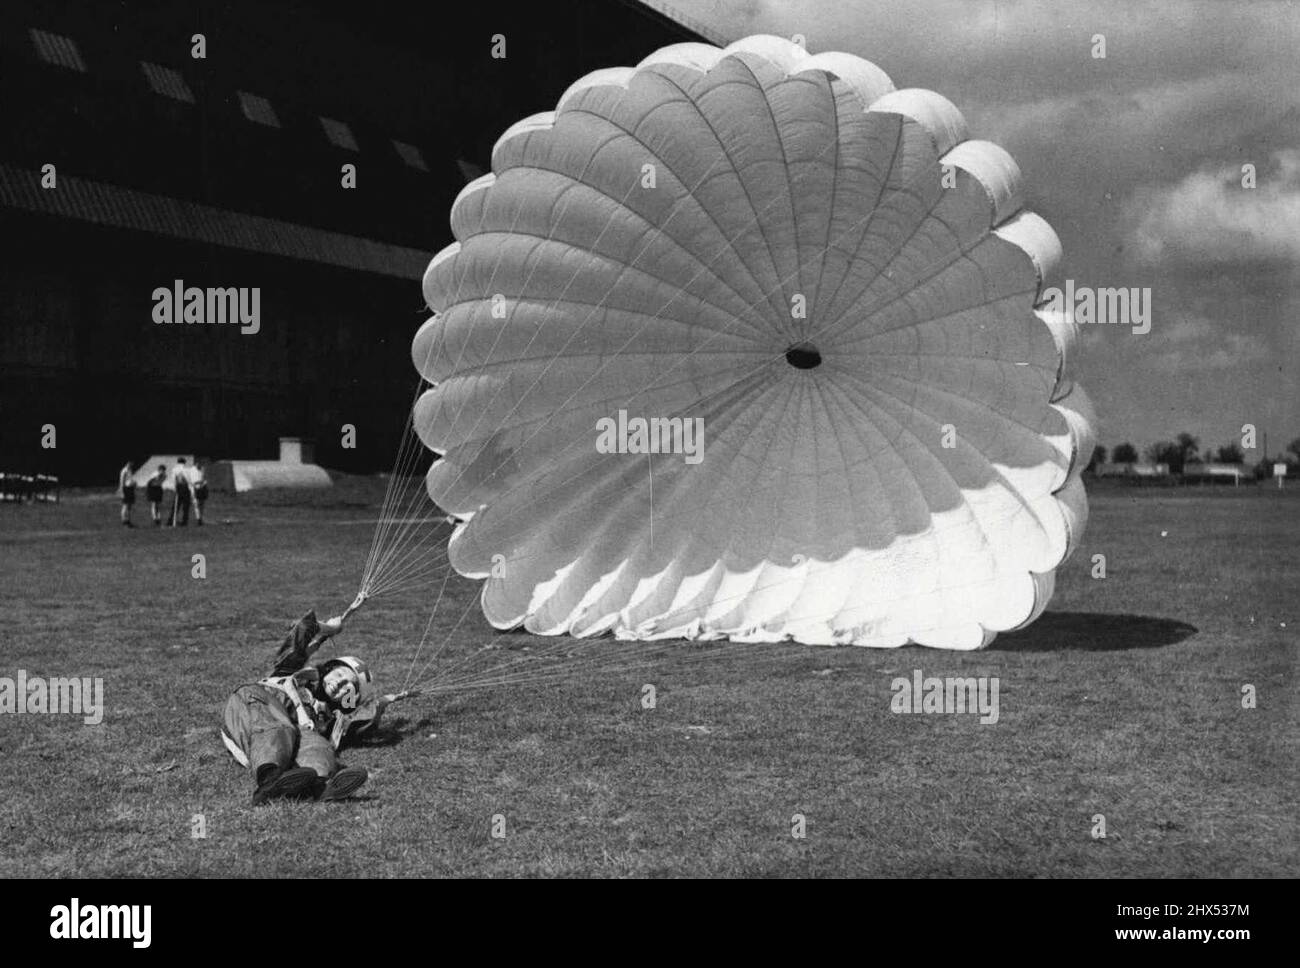 Britain's Parachute Nurses Rehearse for the Royal Tournament - Aircraftman G. Sheldon gets caught in the breeze and is dragged by her parachute after making a desert during rehearsal at Cardington. Teams form all branches of the Services are ***** hard at work rehearsing for the forth coming Royal Tournament to be opened at Earls Court, London. A feature of the Tournament will be a display by parachute nurses of the R.A.F. Nursing Orderly Services. May 19, 1950. (Photo by Sport & General Press Agency, Limited). Stock Photo